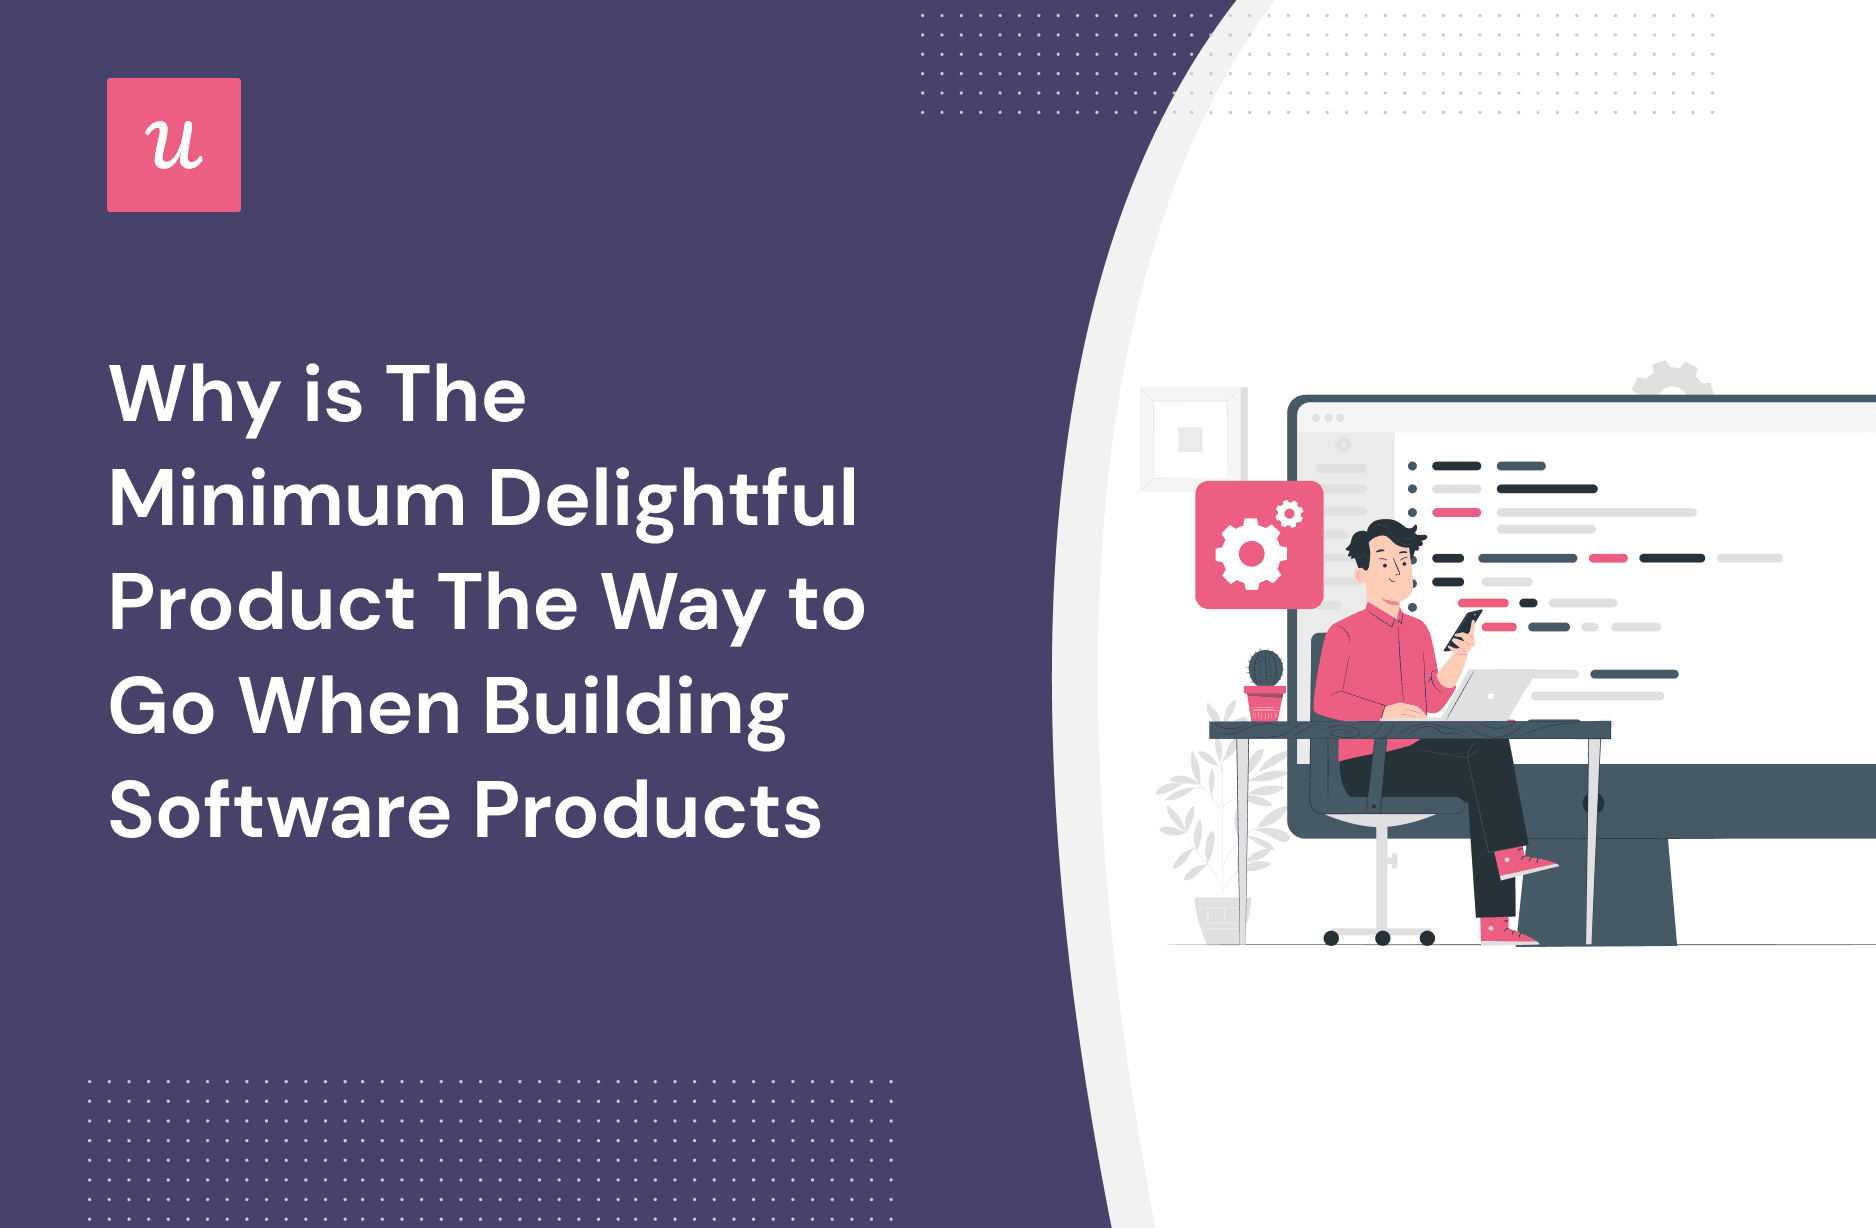 Why is the Minimum Delightful Product The Way To Go When Building Software Products cover